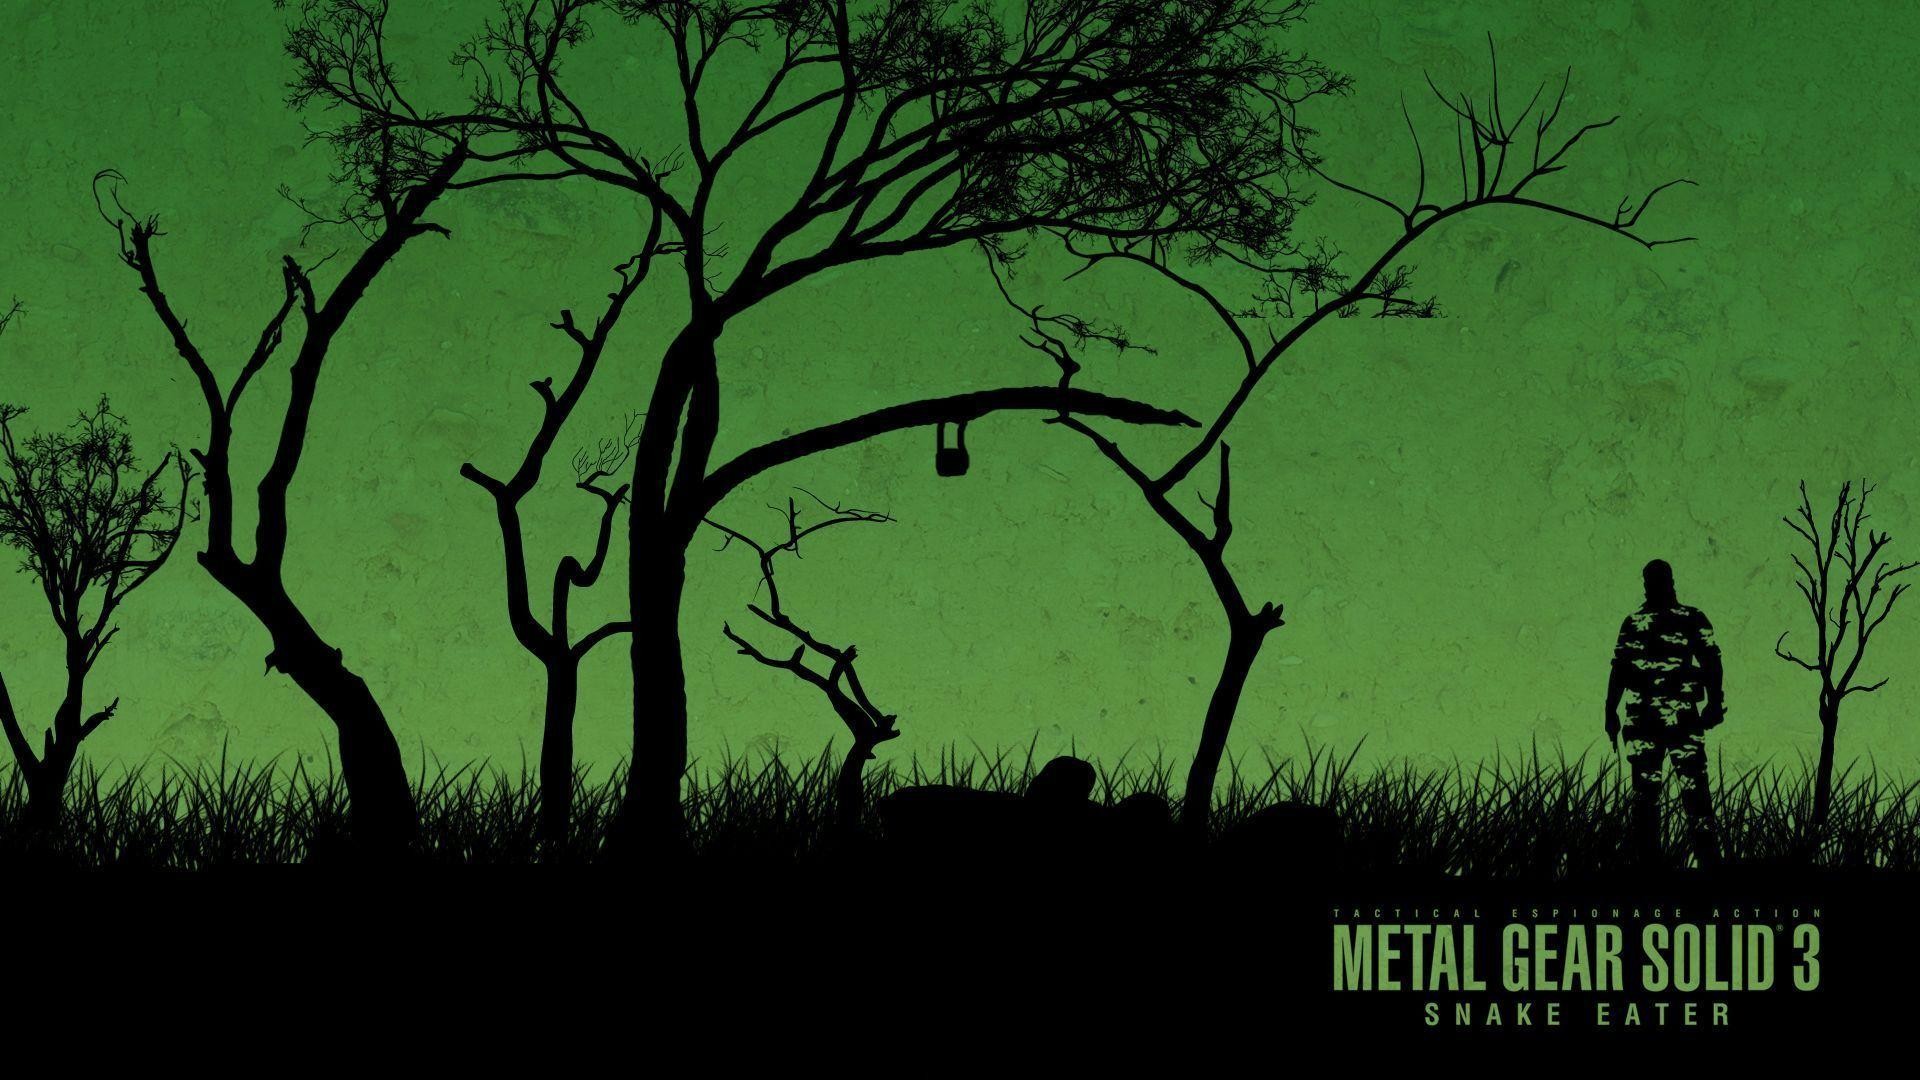 1920x1080 Metal Gear Solid 3 Wallpaper Hd Images & Pictures - Becuo